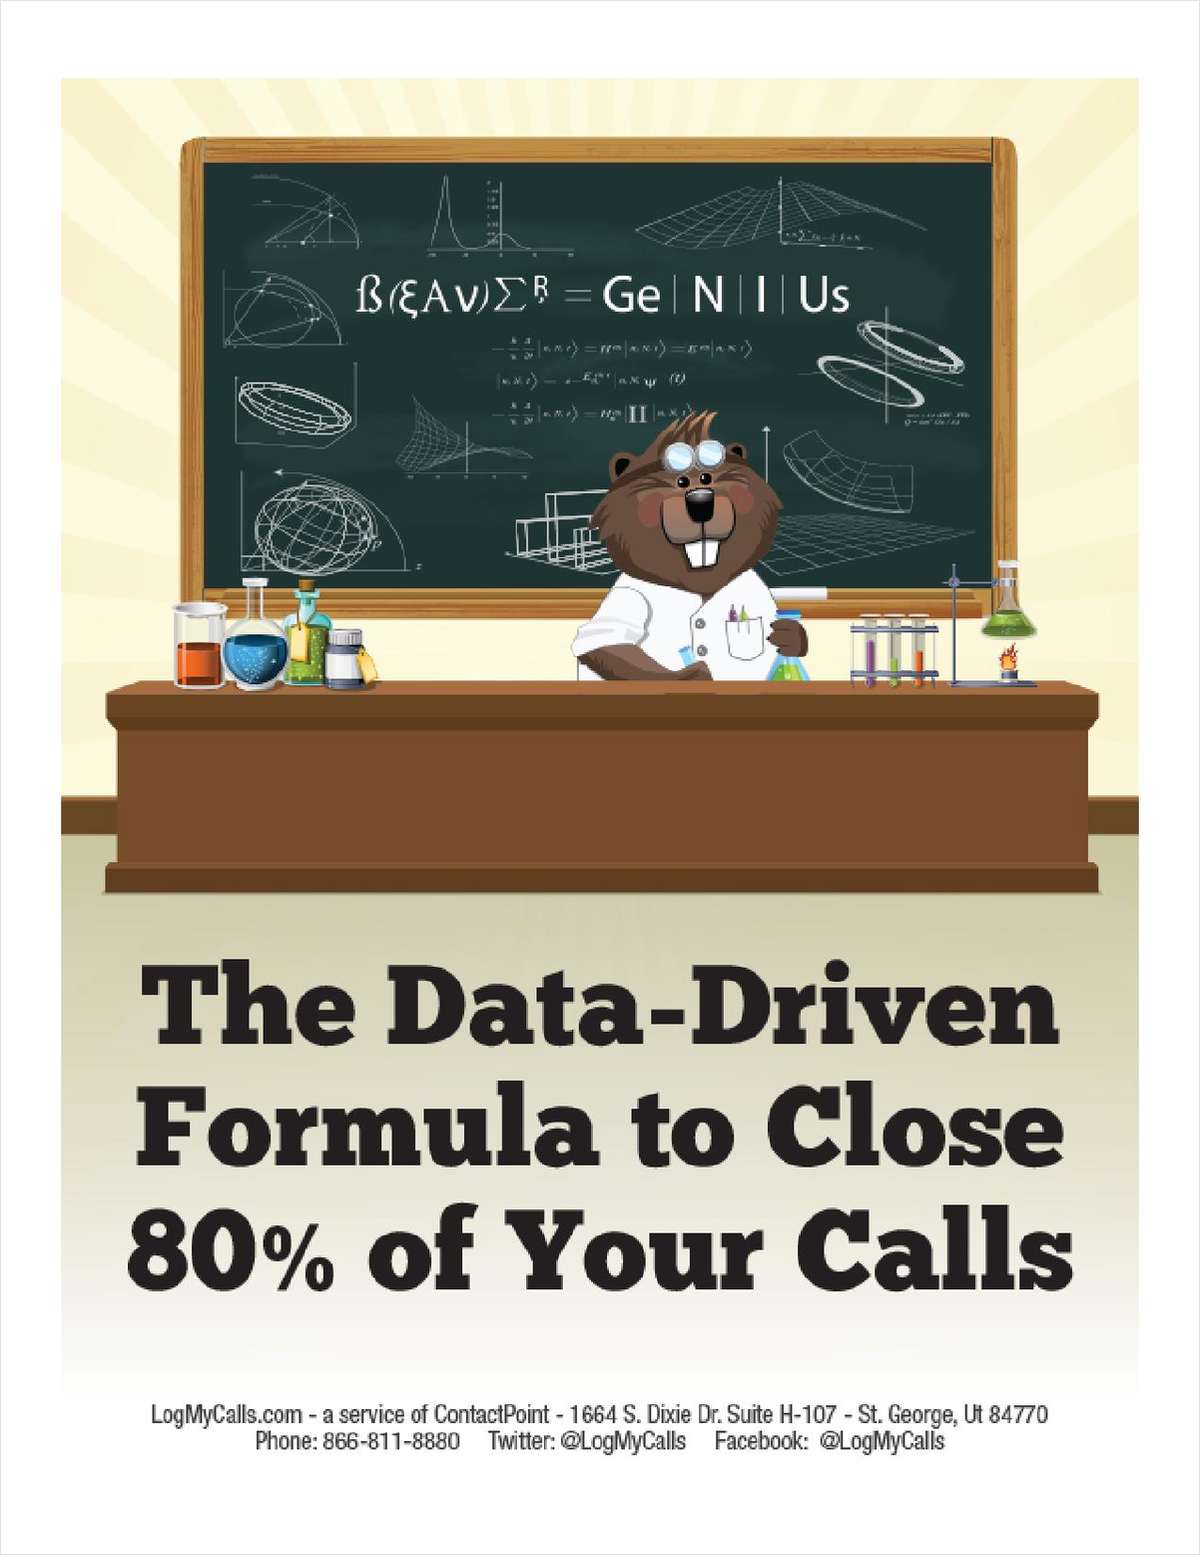 The Data-Driven Formula to Close 80% of Your Calls